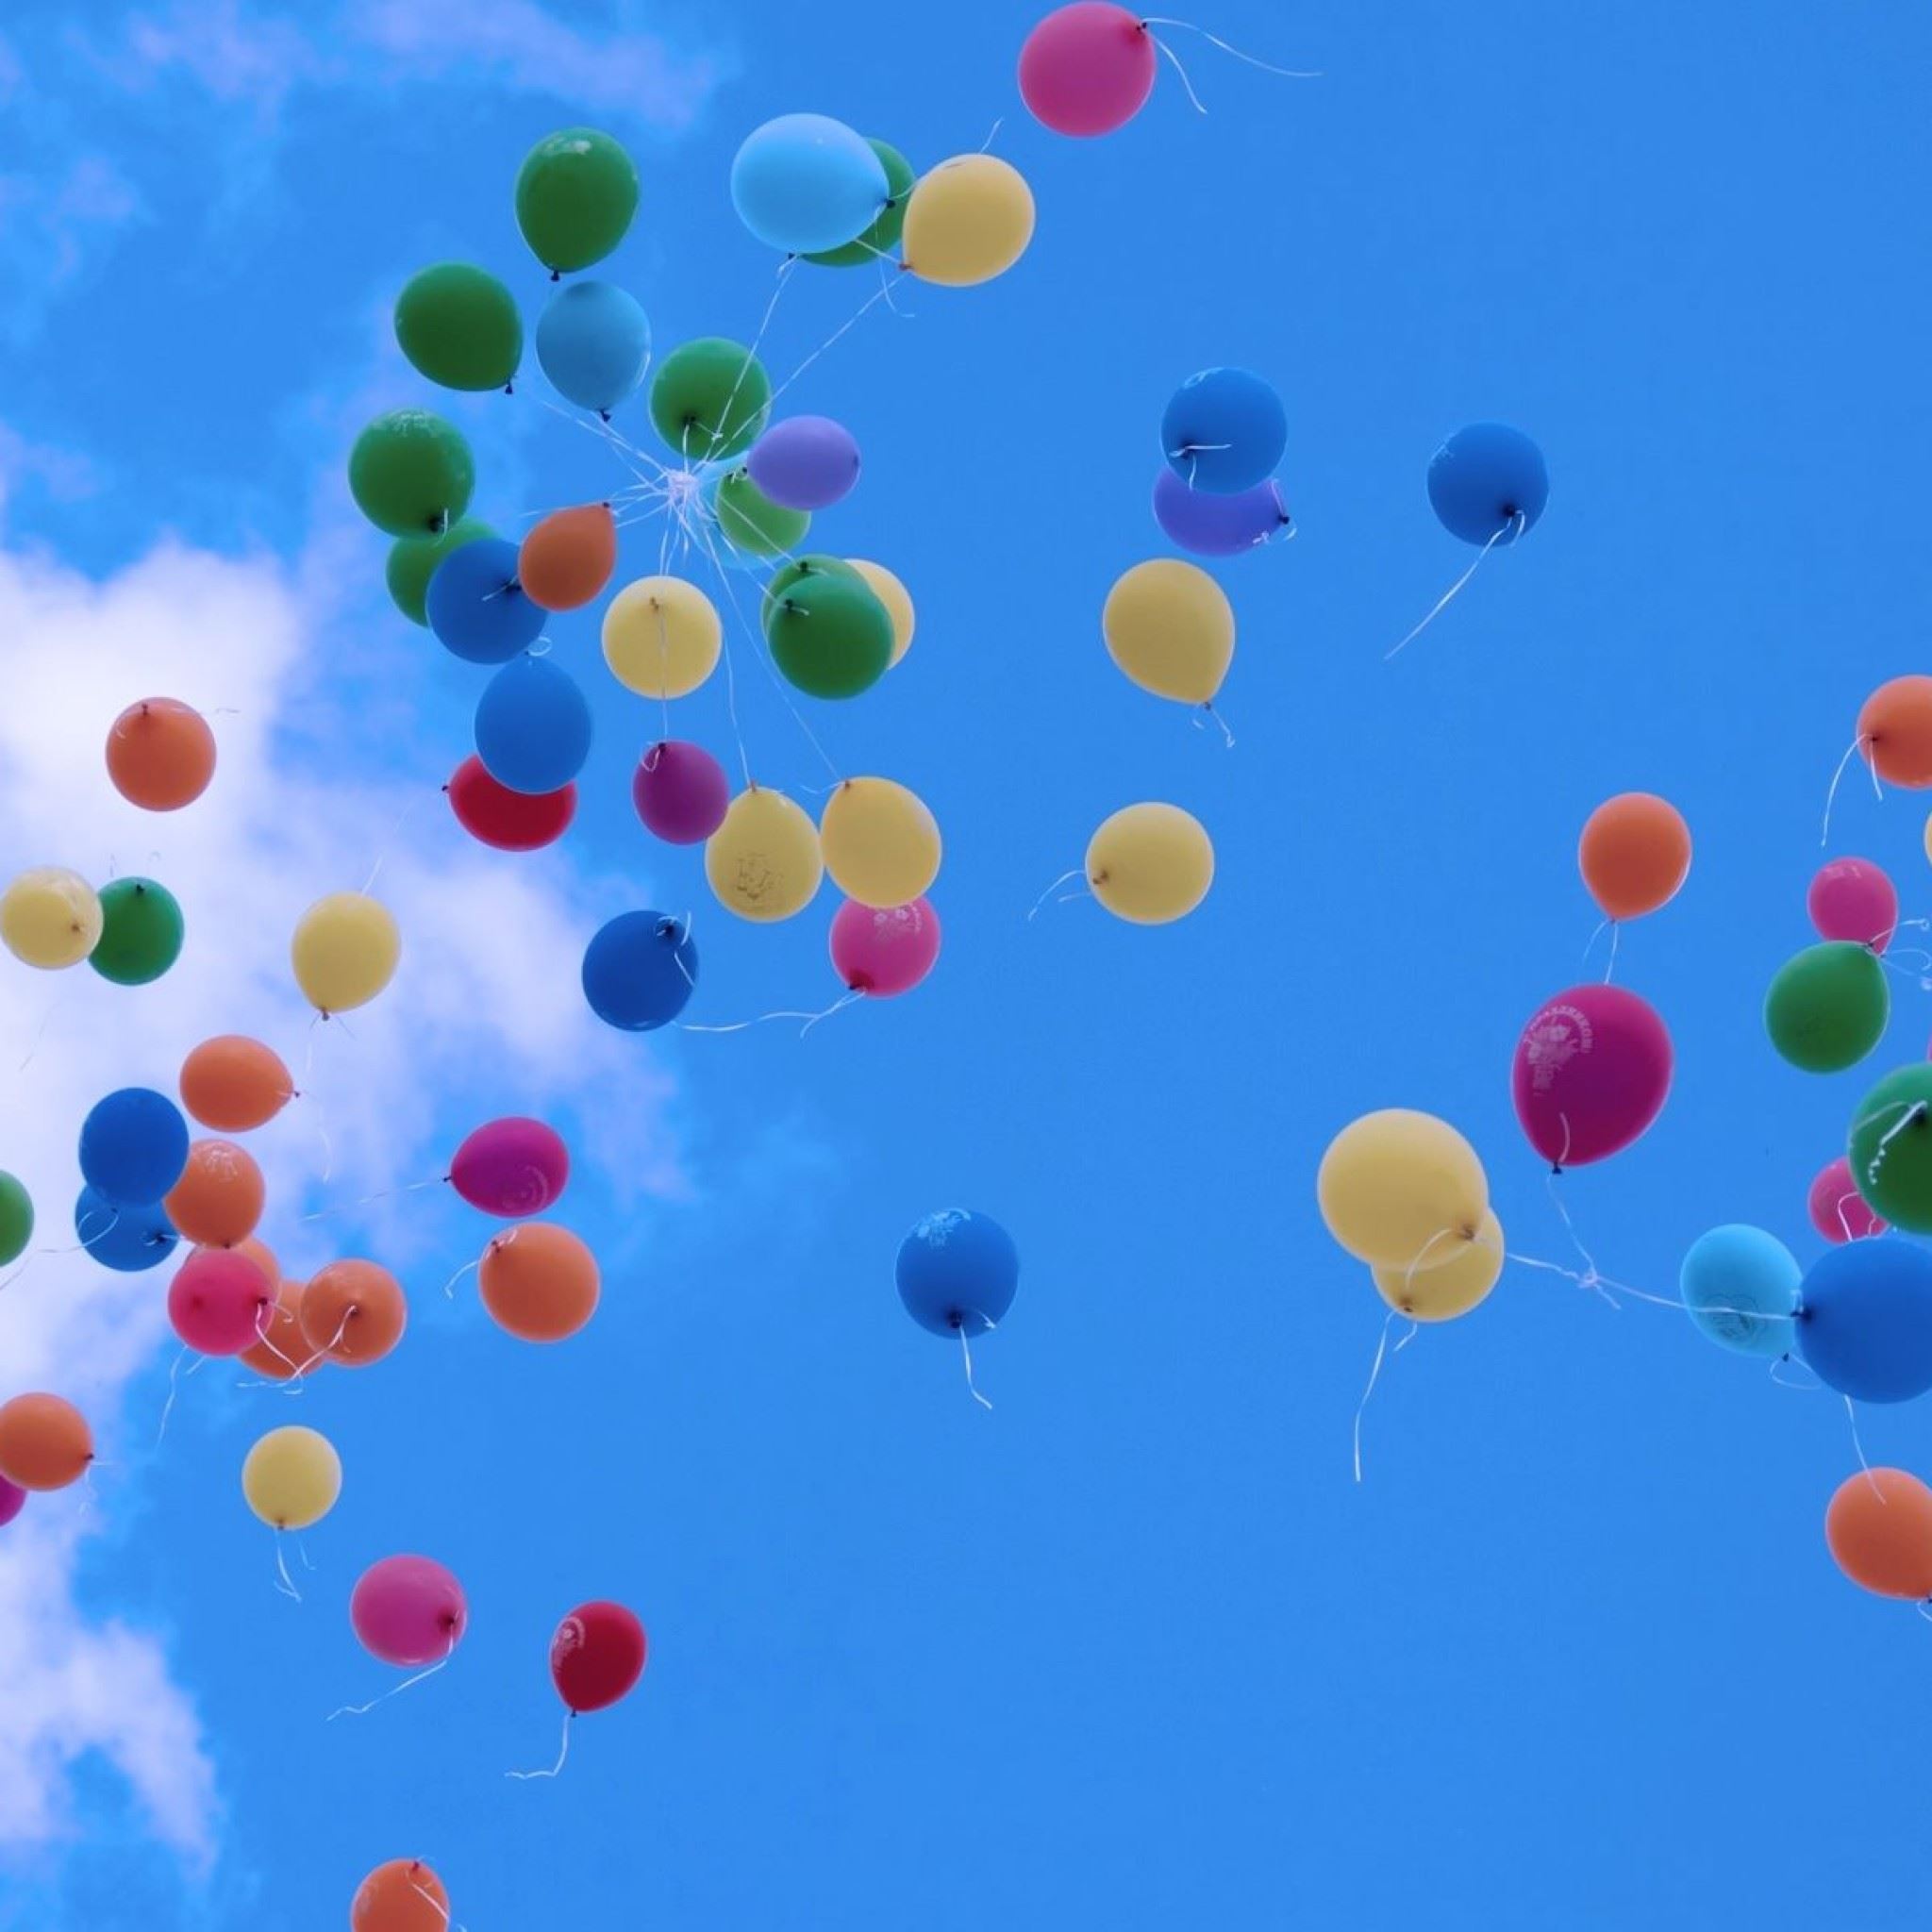 Colorful Balloons In The Sky iPad Air wallpaper 